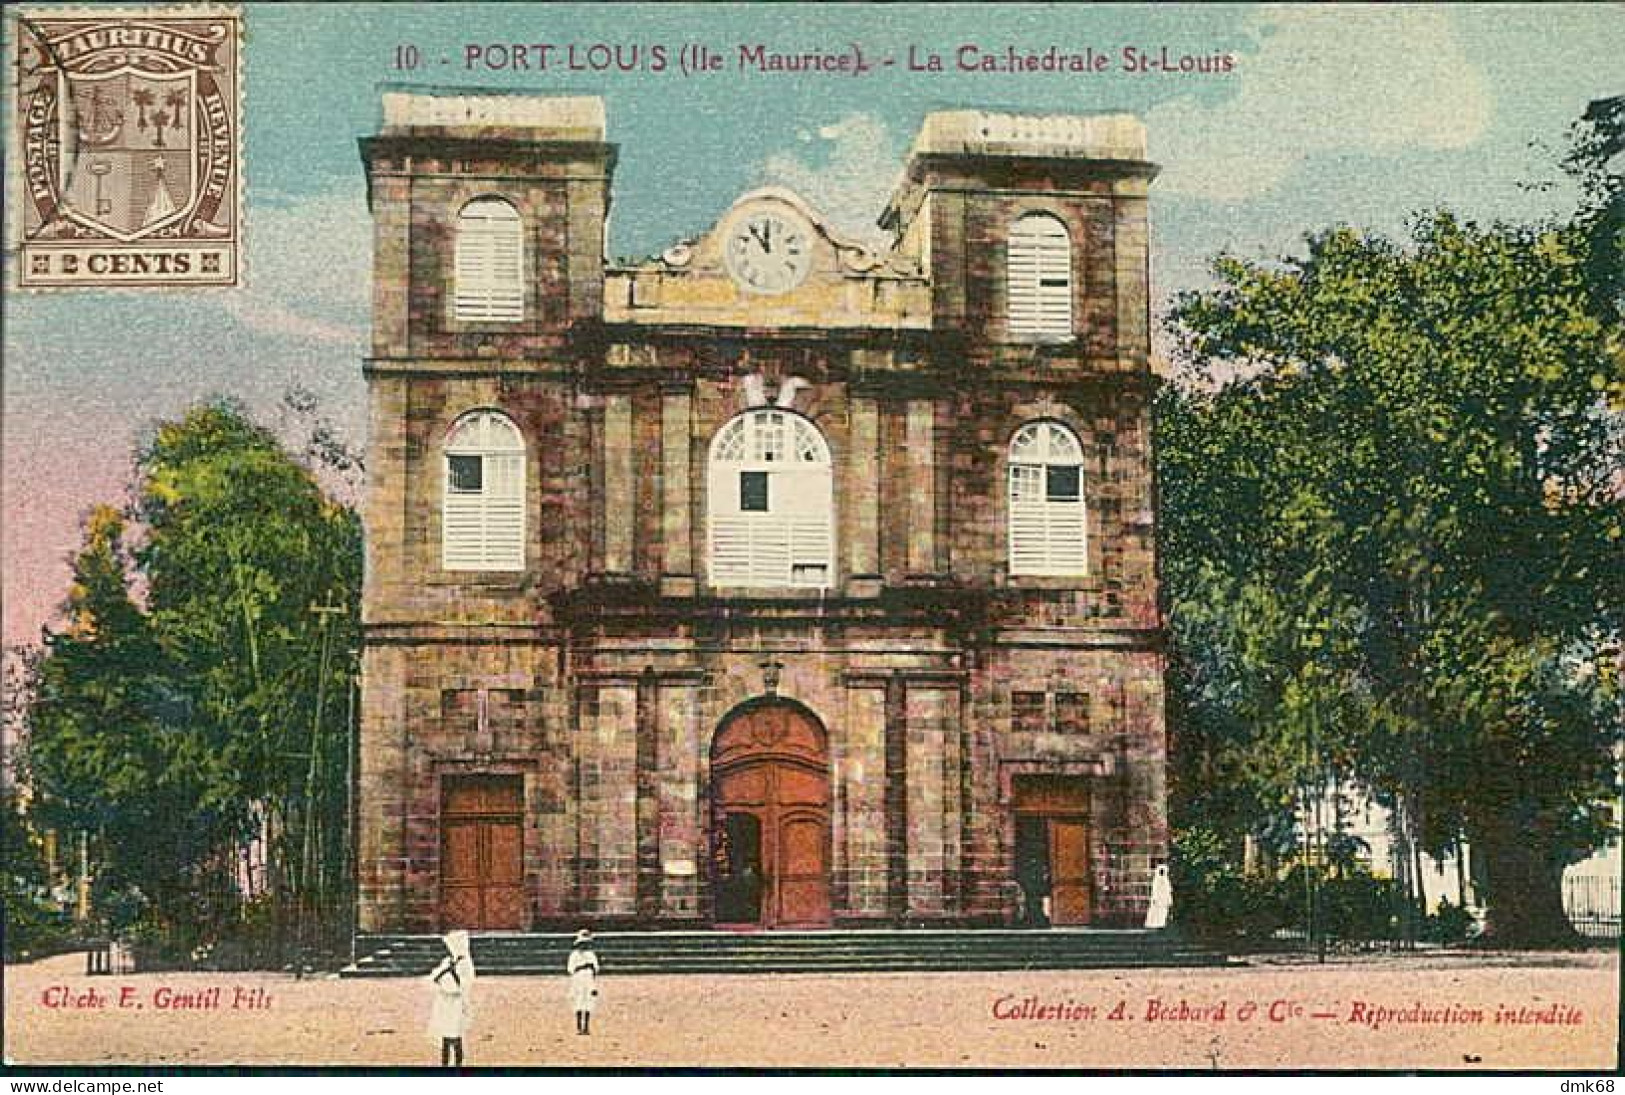 AFRICA - MAURITIUS / ILE MAURICE - PORT LOUIS - LA CATHEDRALE ST. LOUIS - PHOT. L'ABEILLE - MAILED 1924 / STAMP (12575) - Maurice